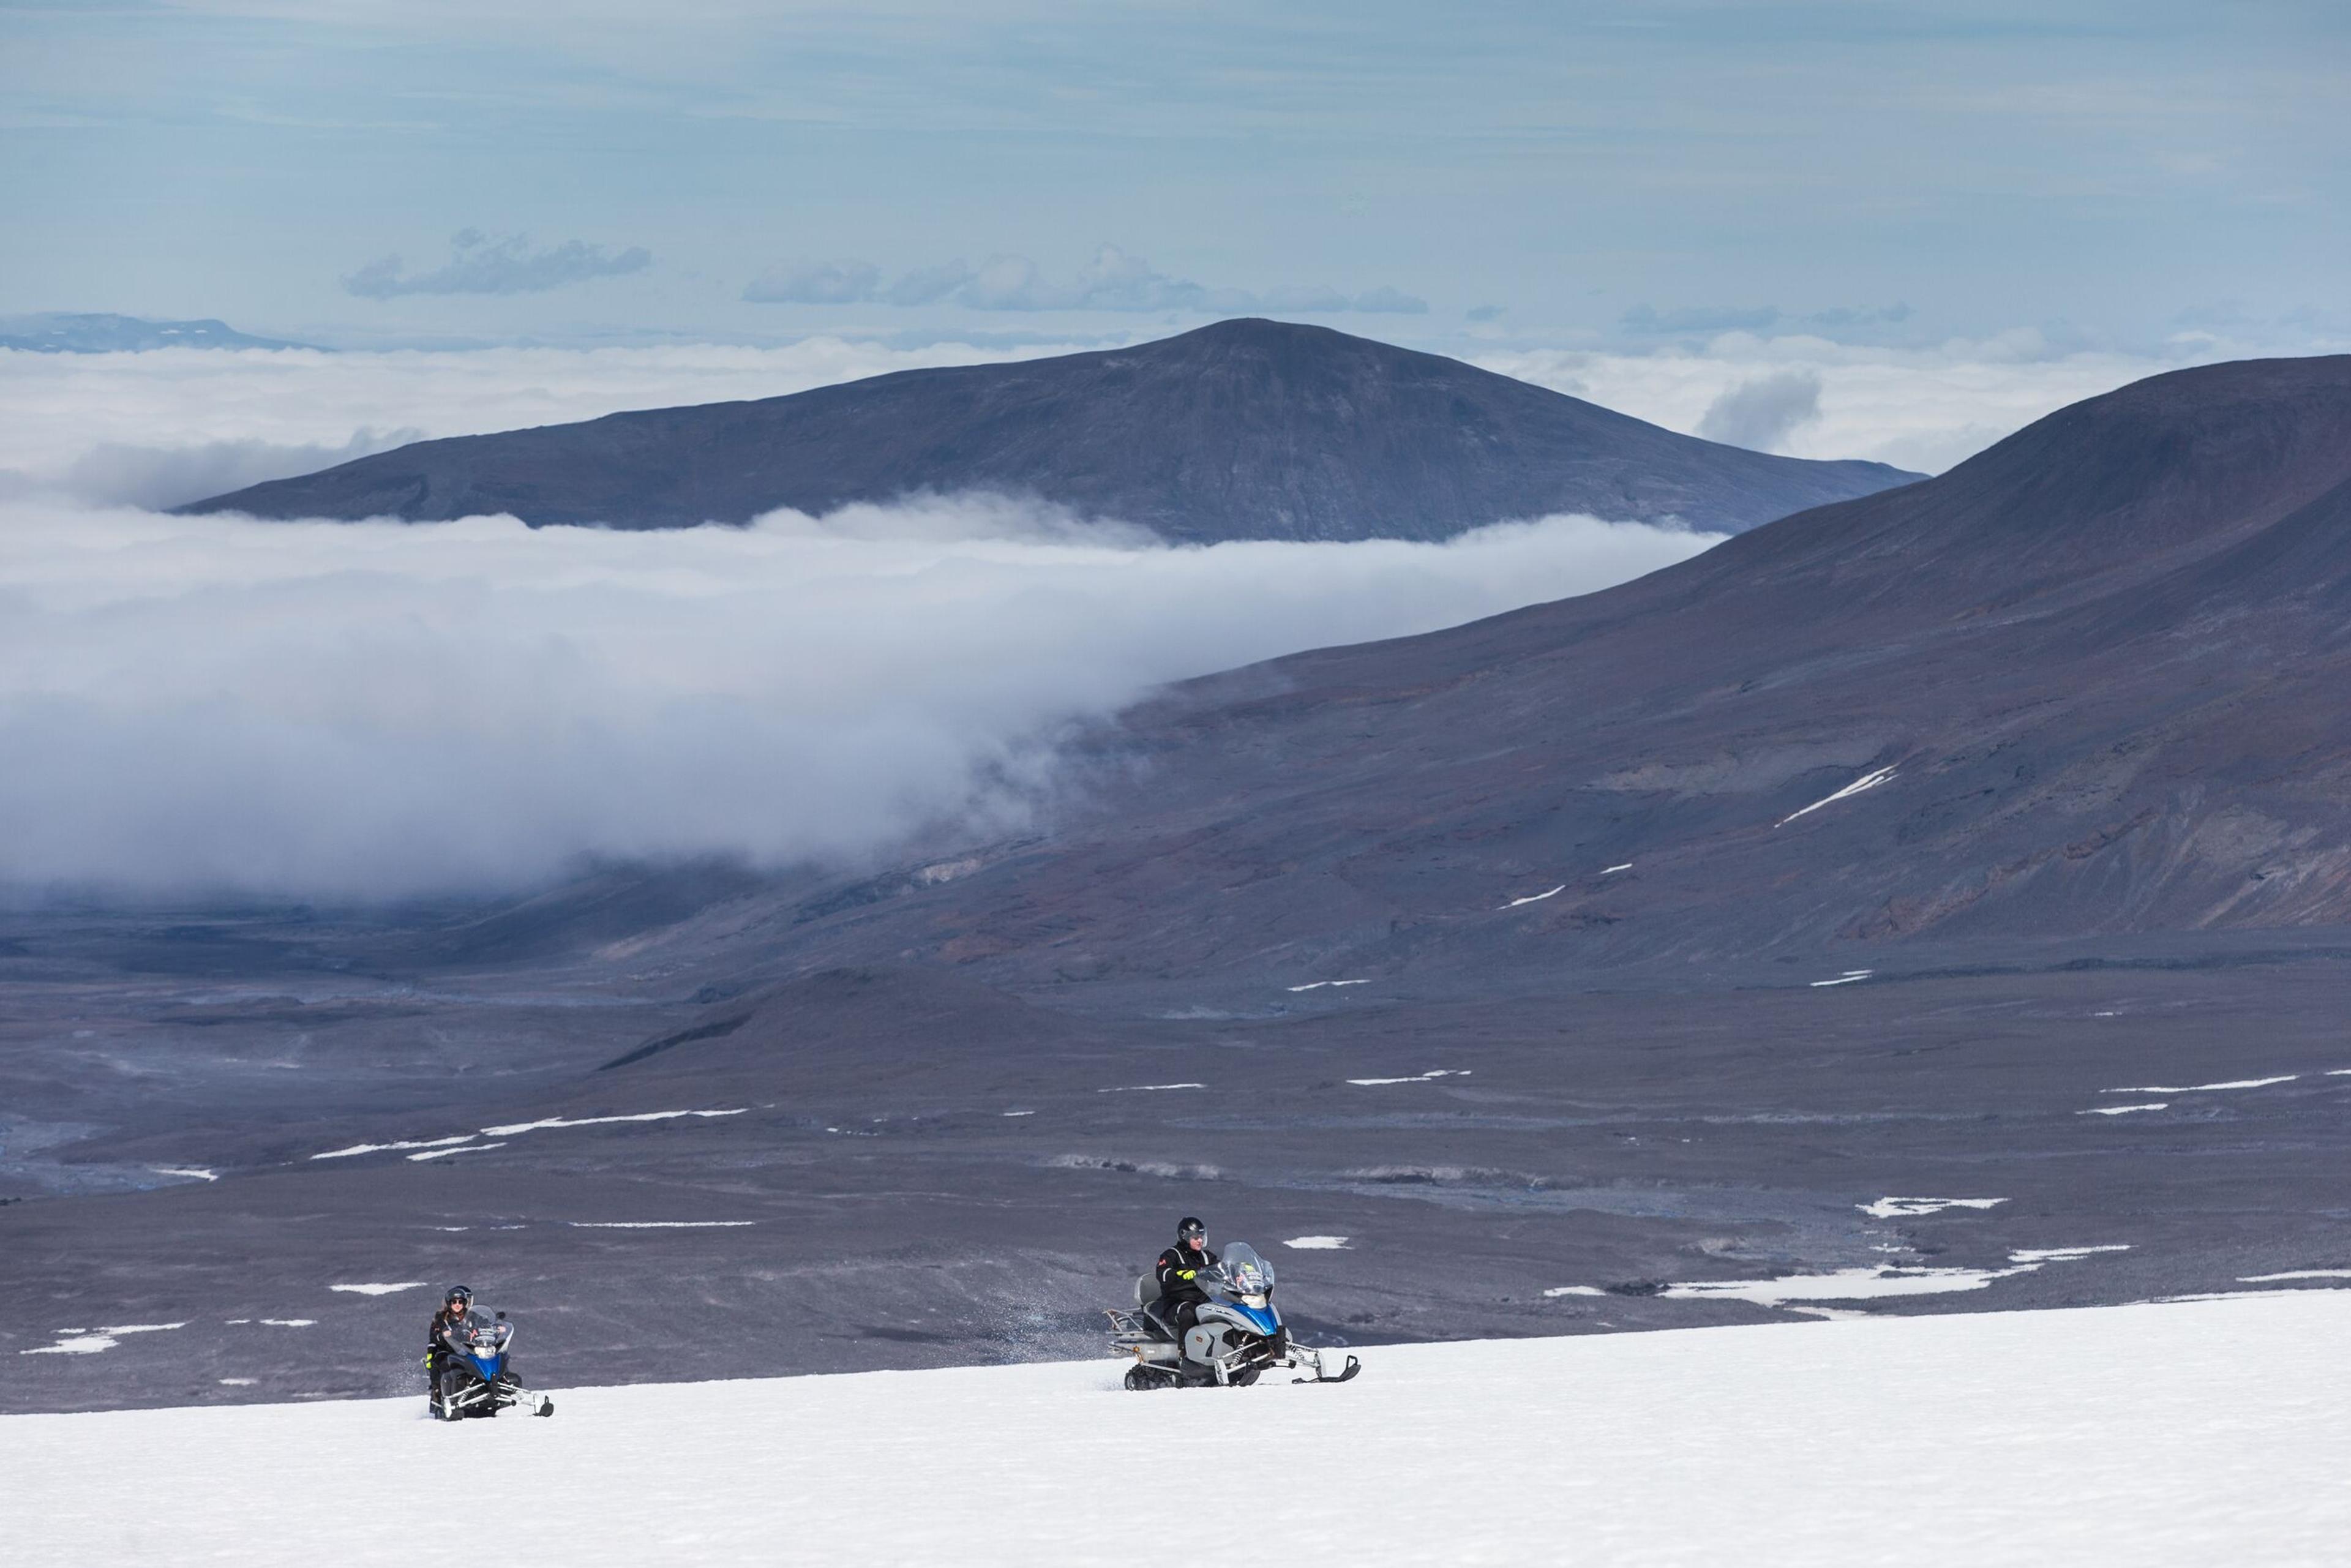 Two snowmobilers embarking on an adventure across the Langjökull glacier, with a rugged brown mountain and dramatic clouds in the background